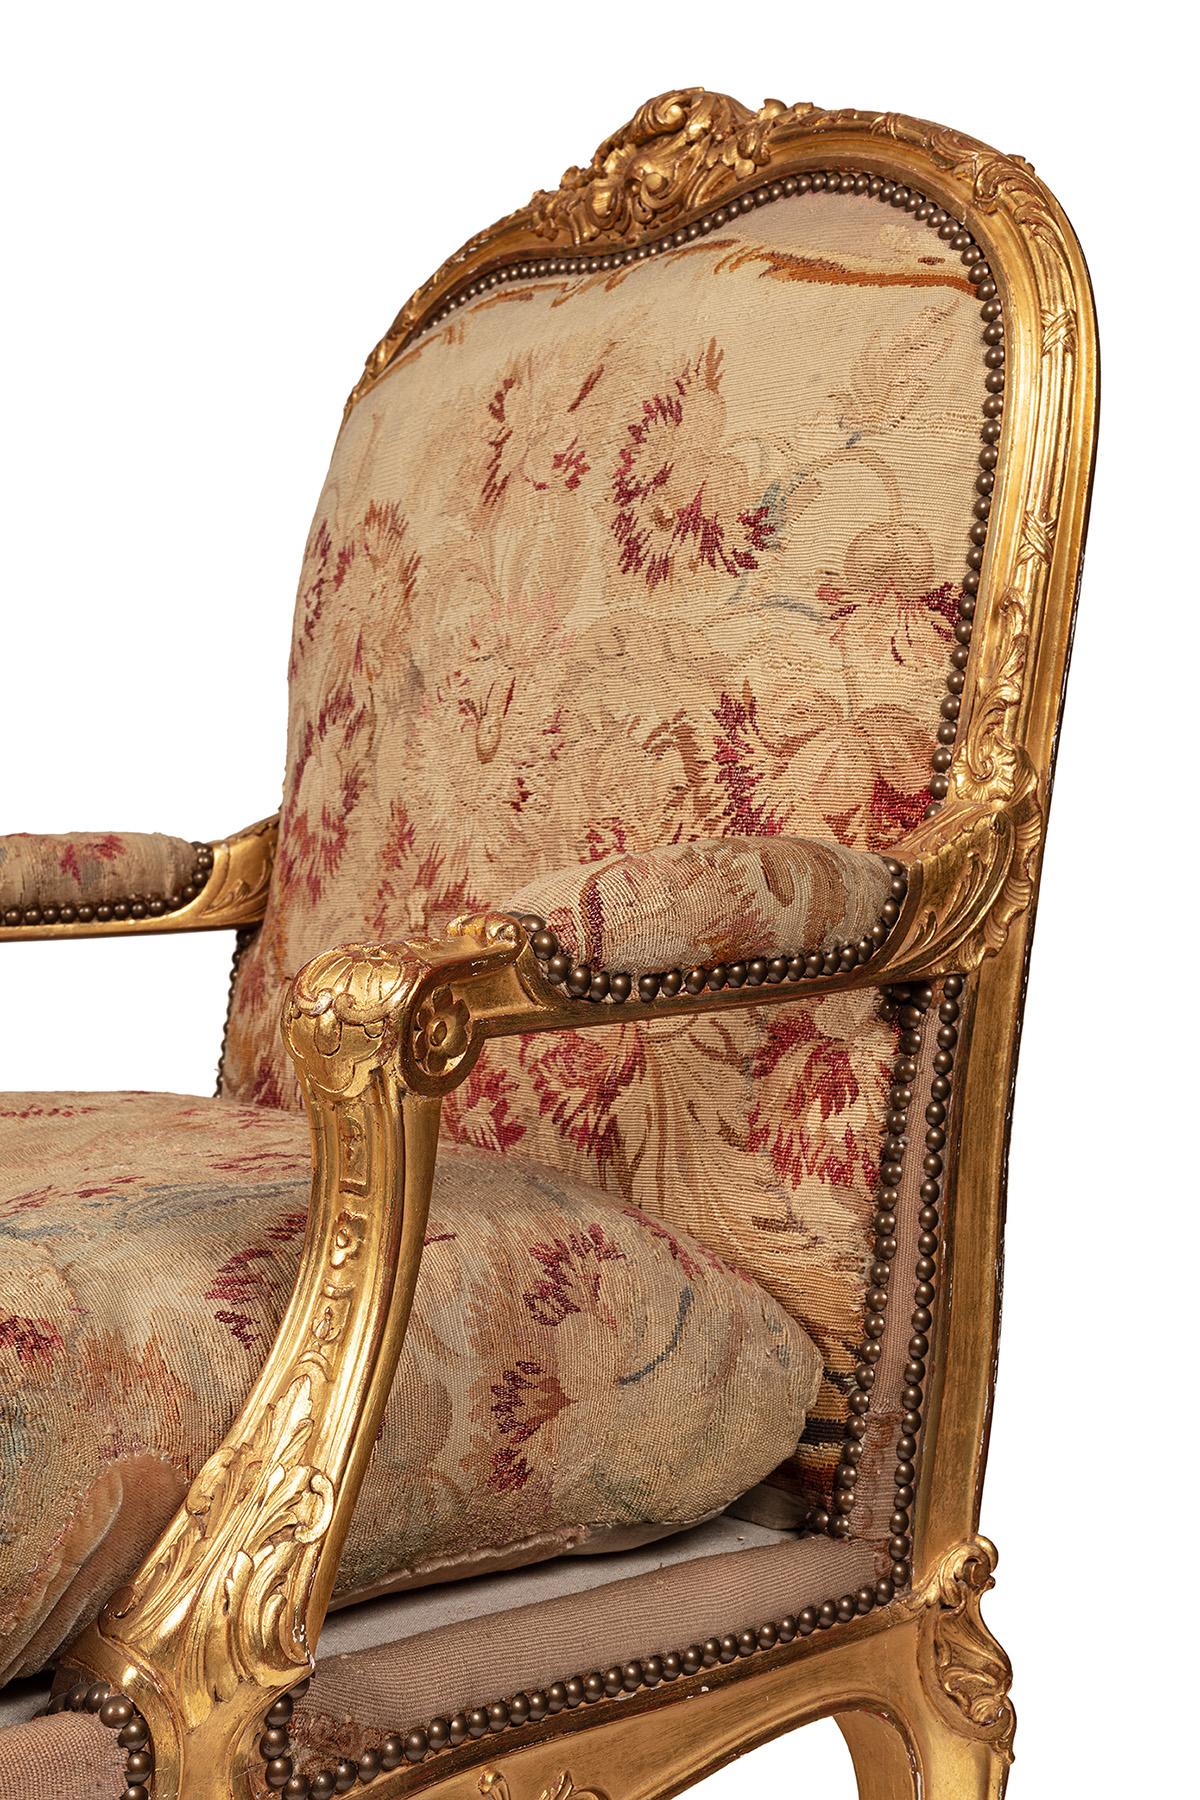 An extremly rare bergere upholster with aubusson tapisterie louis XIV style in giltwood, very confortable, the carving of this bergere is whismical.,its very rare that the tapistery is in very good condition and was never touch